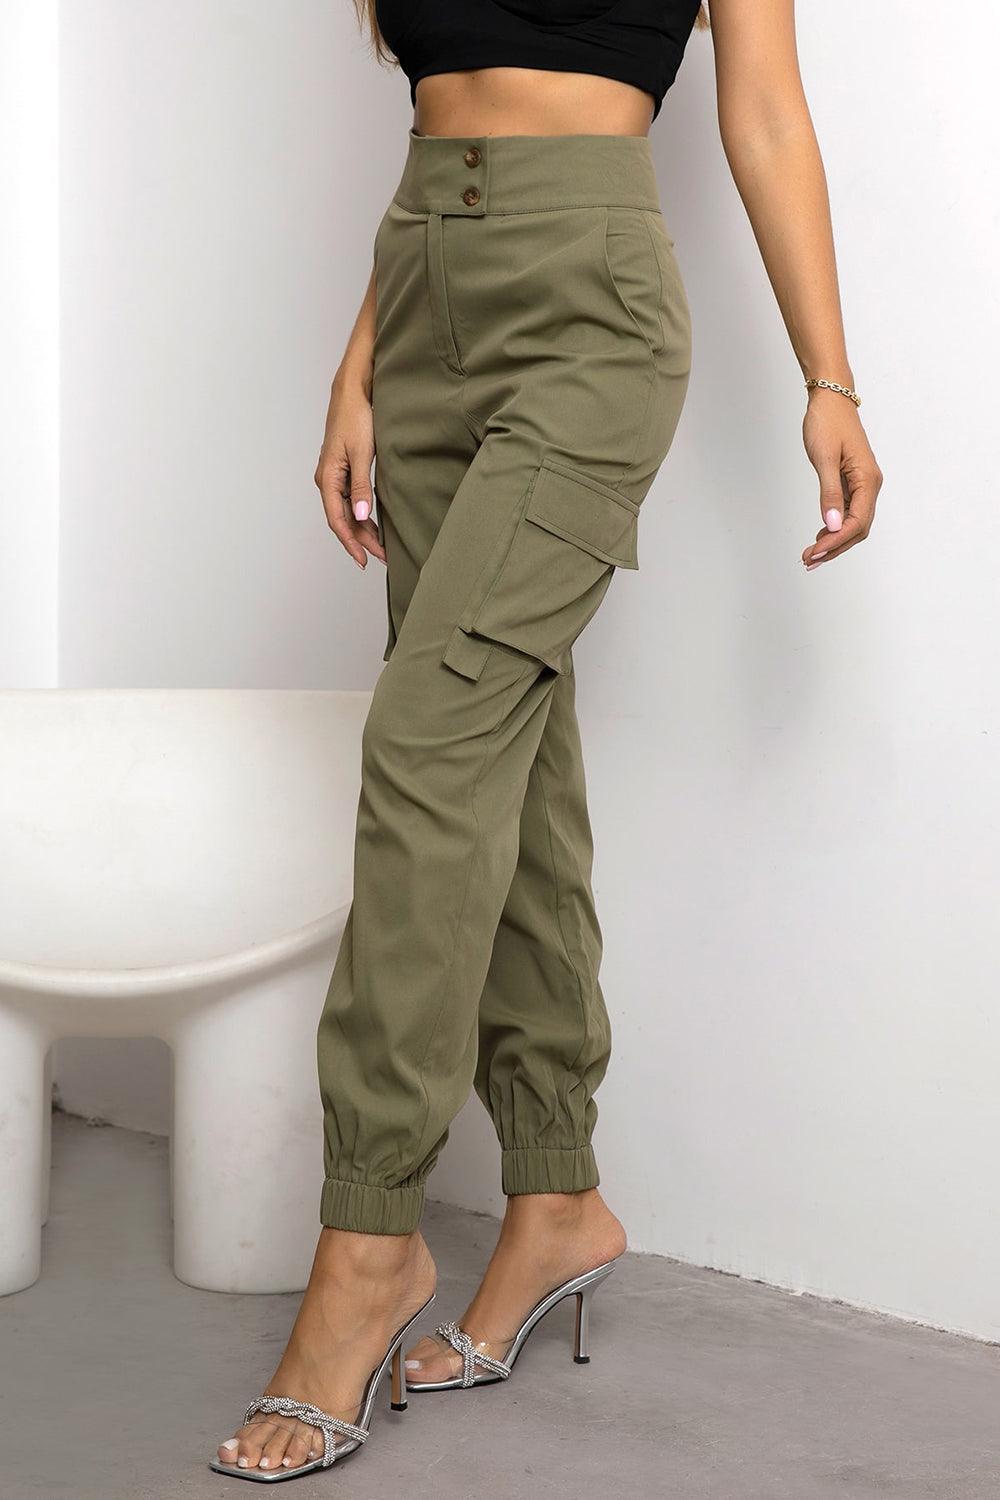 High Waist Cargo Pants - Anchored Feather Boutique